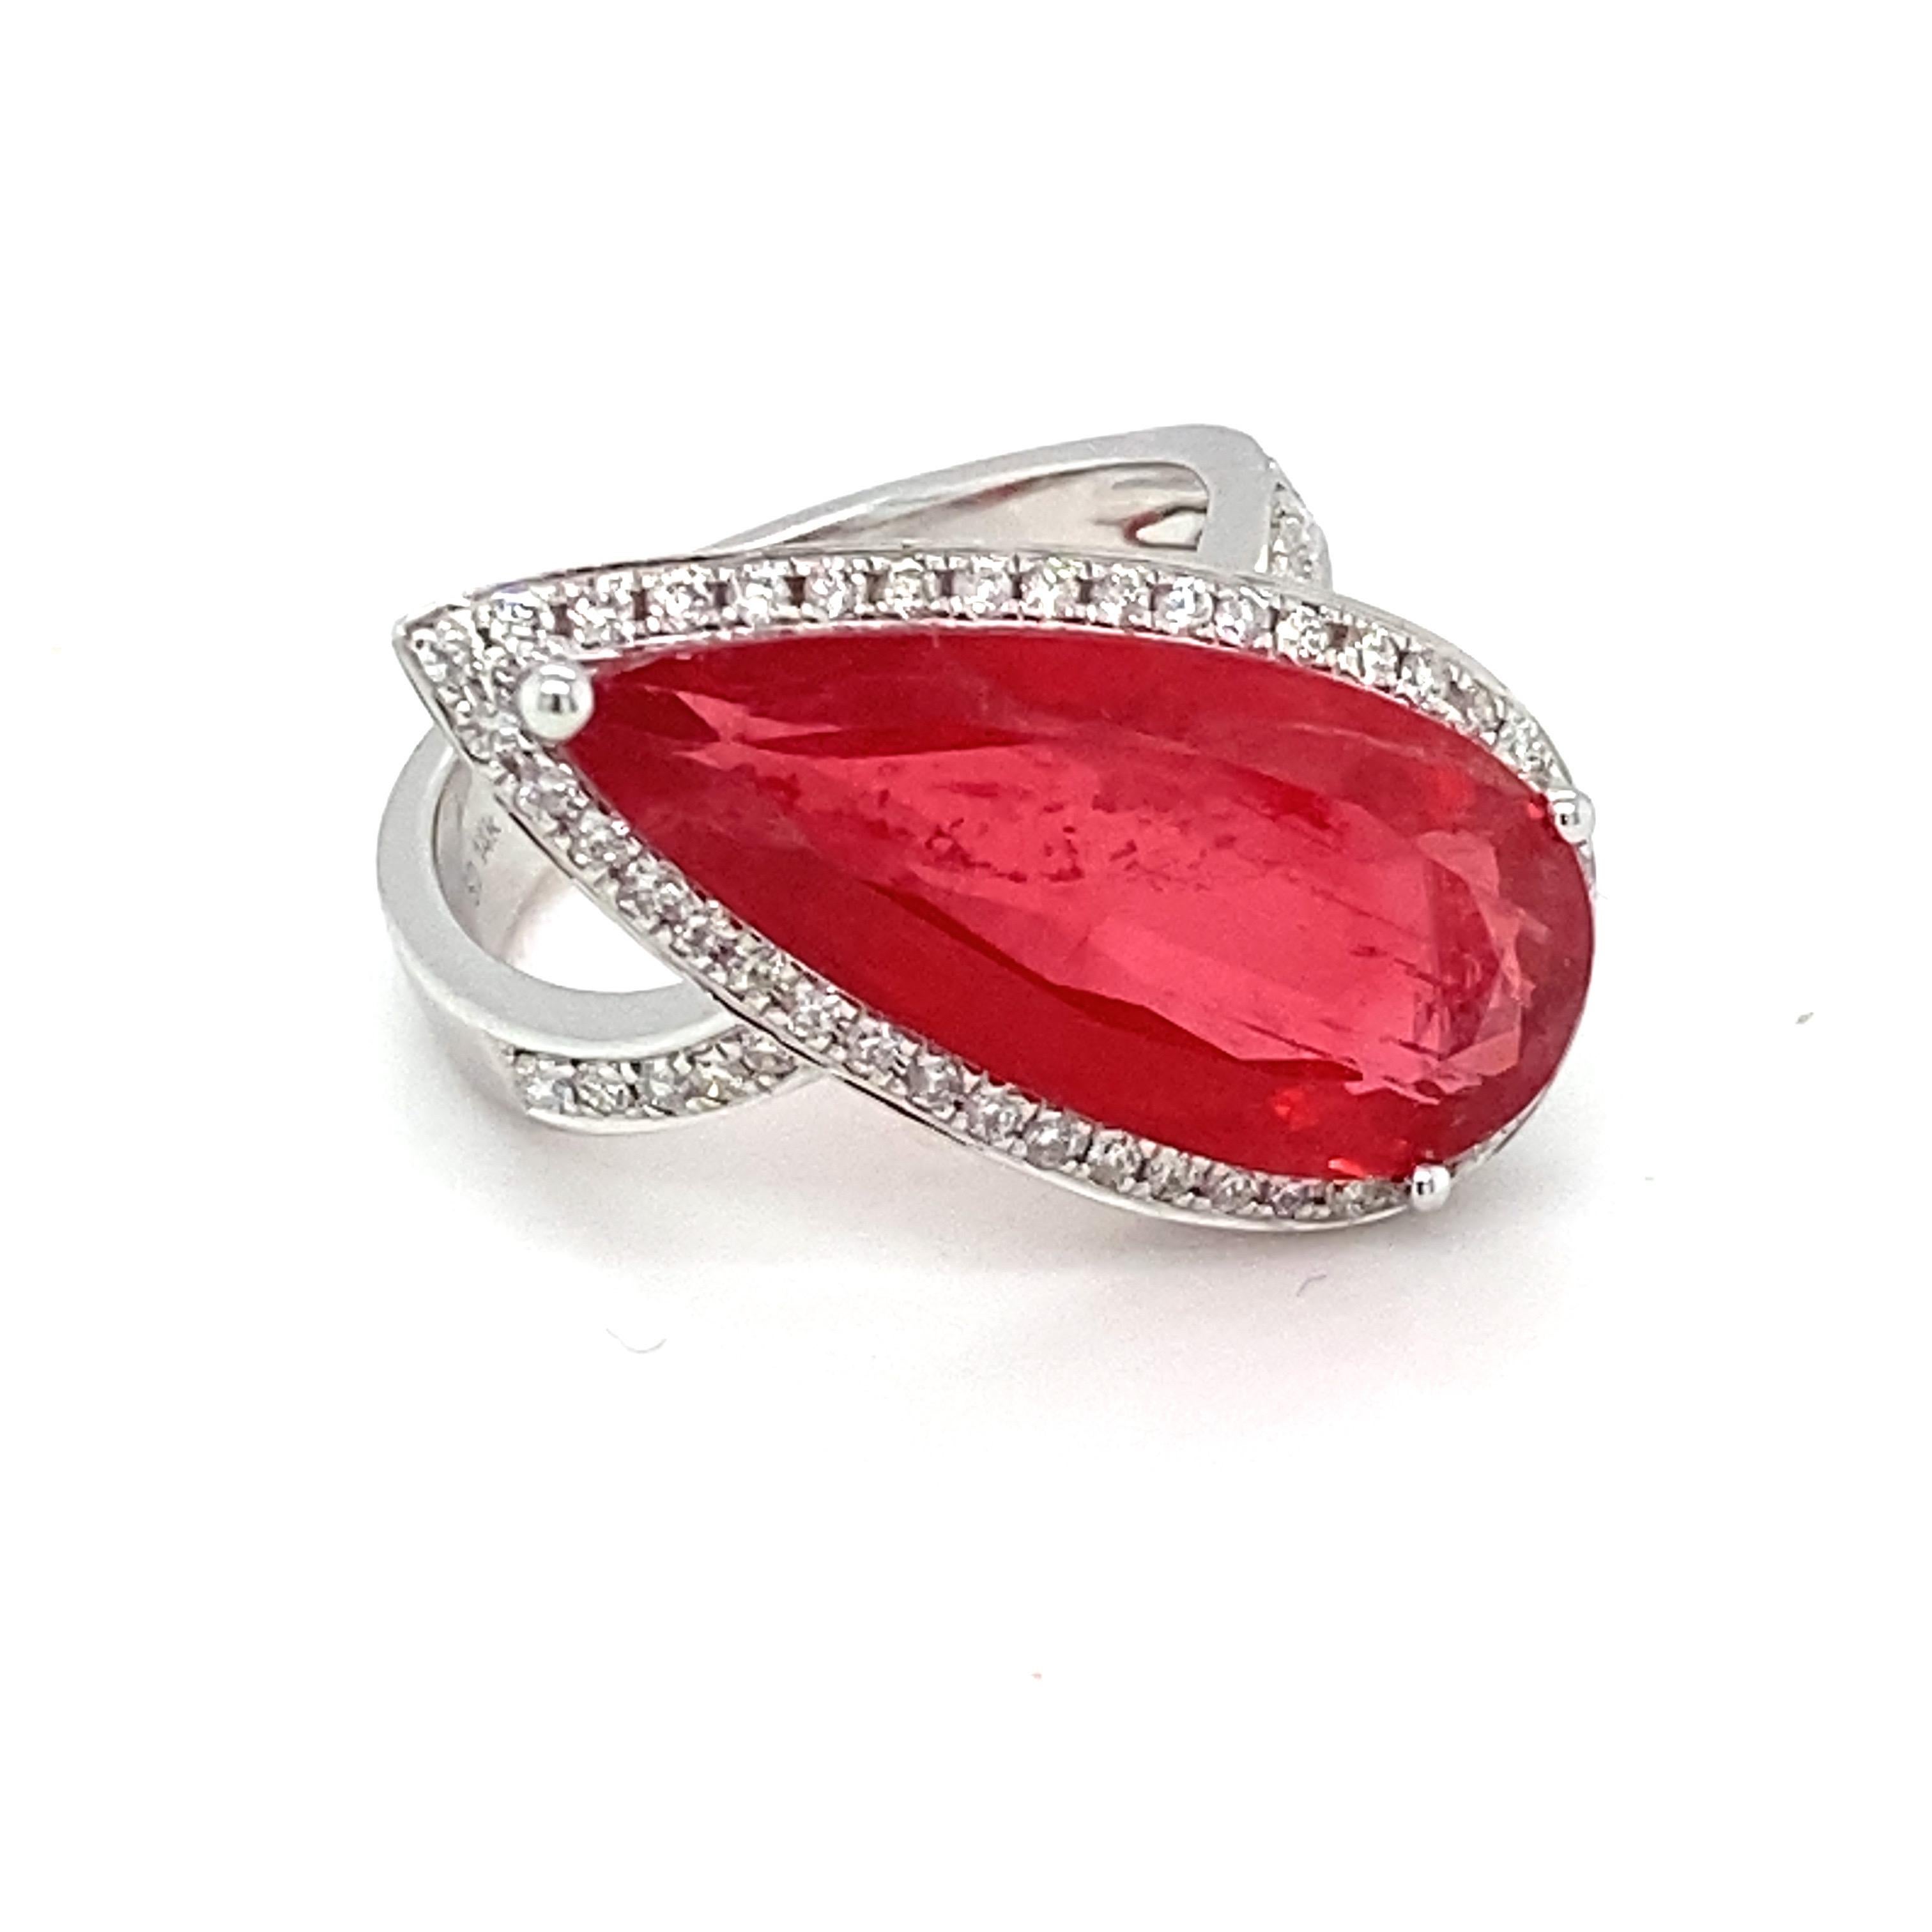 This 9.32 carat elongated pear rhodonite is set with three prongs framed by a halo of white diamond and has accents of diamonds on the band. This asymmetric design marries elegance and modernity. Hand finished by master craftsmen is one of a kind